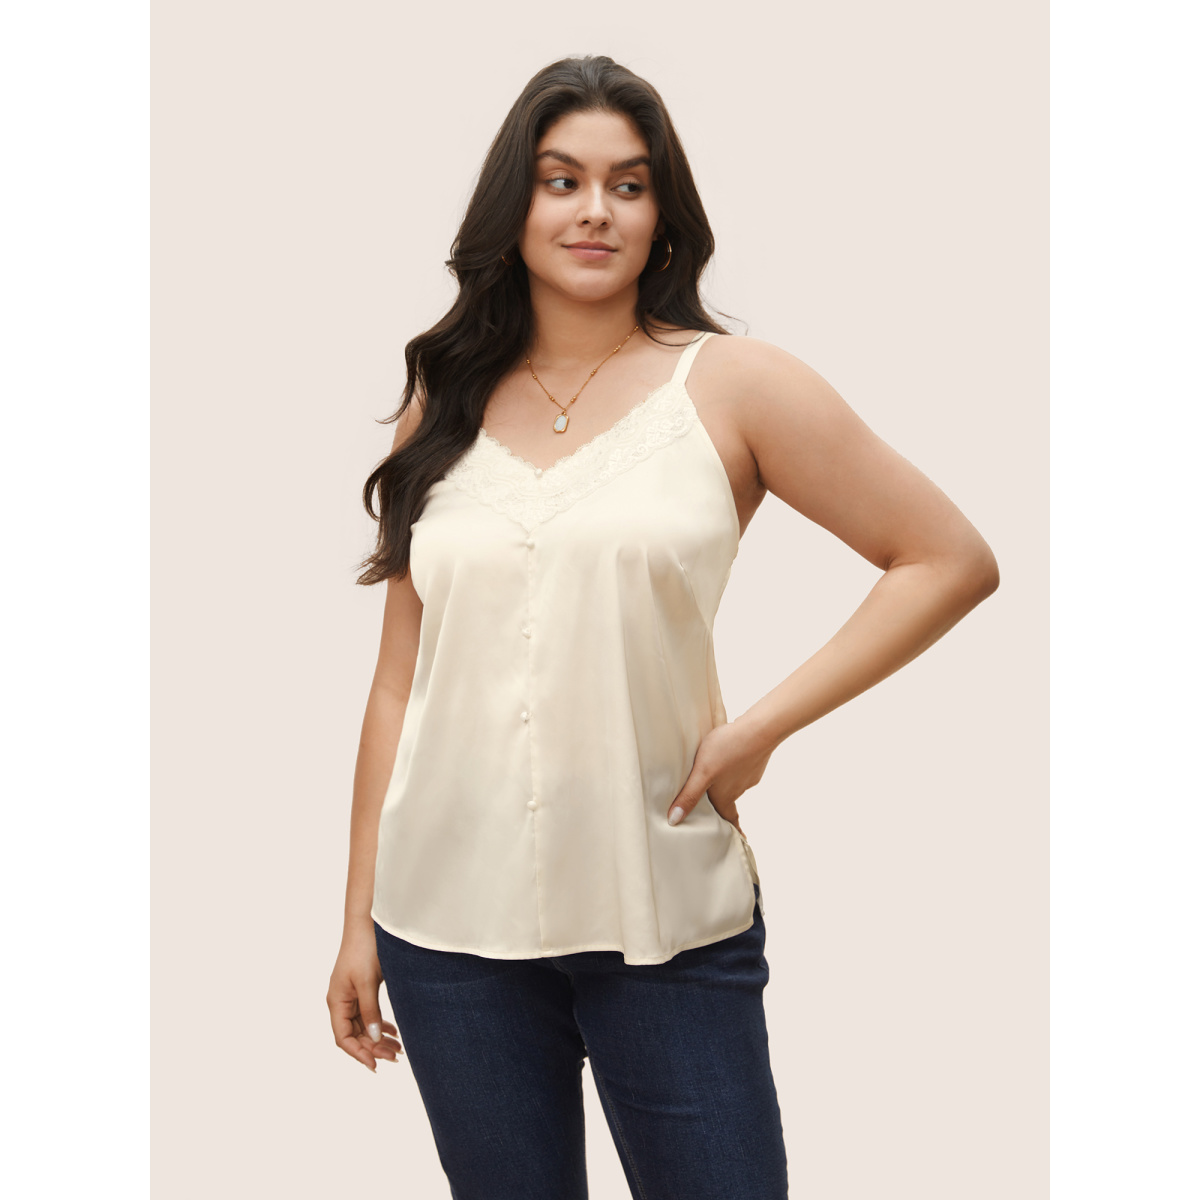 

Plus Size Satin Lace Panel Split Side Cami Top Women Ivory Elegant Woven ribbon&lace trim V-neck Everyday Tank Tops Camis BloomChic